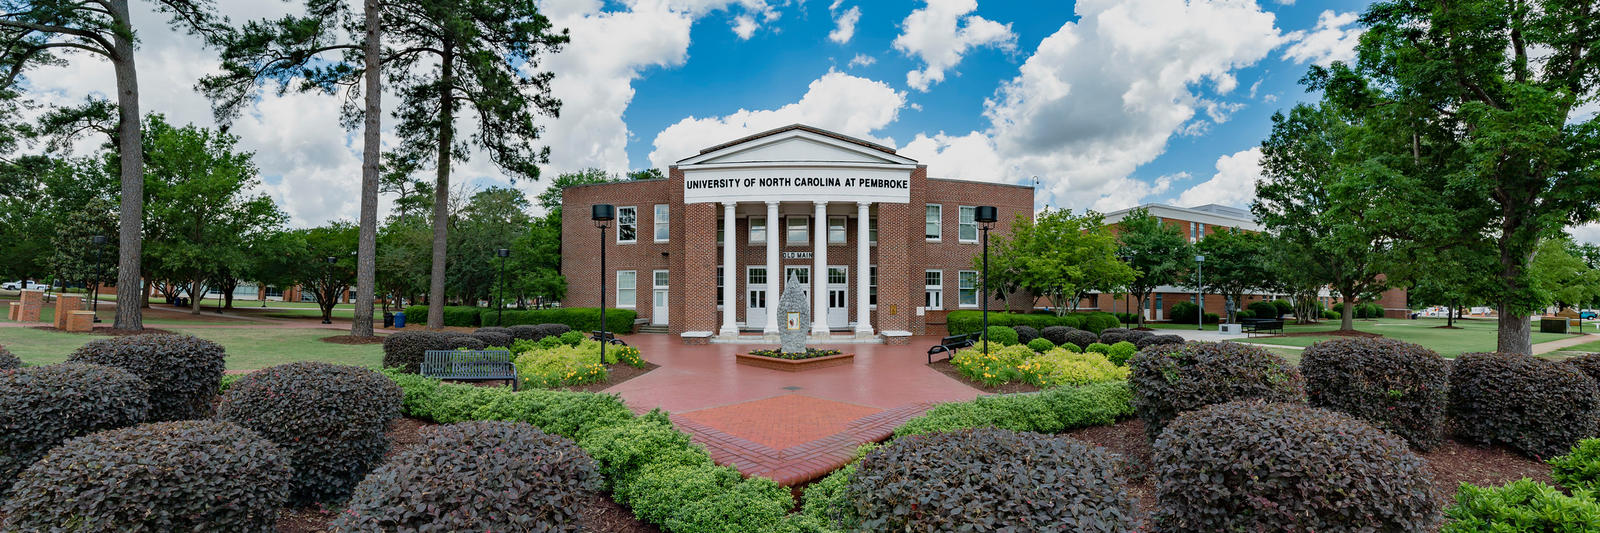 UNCP Old Main